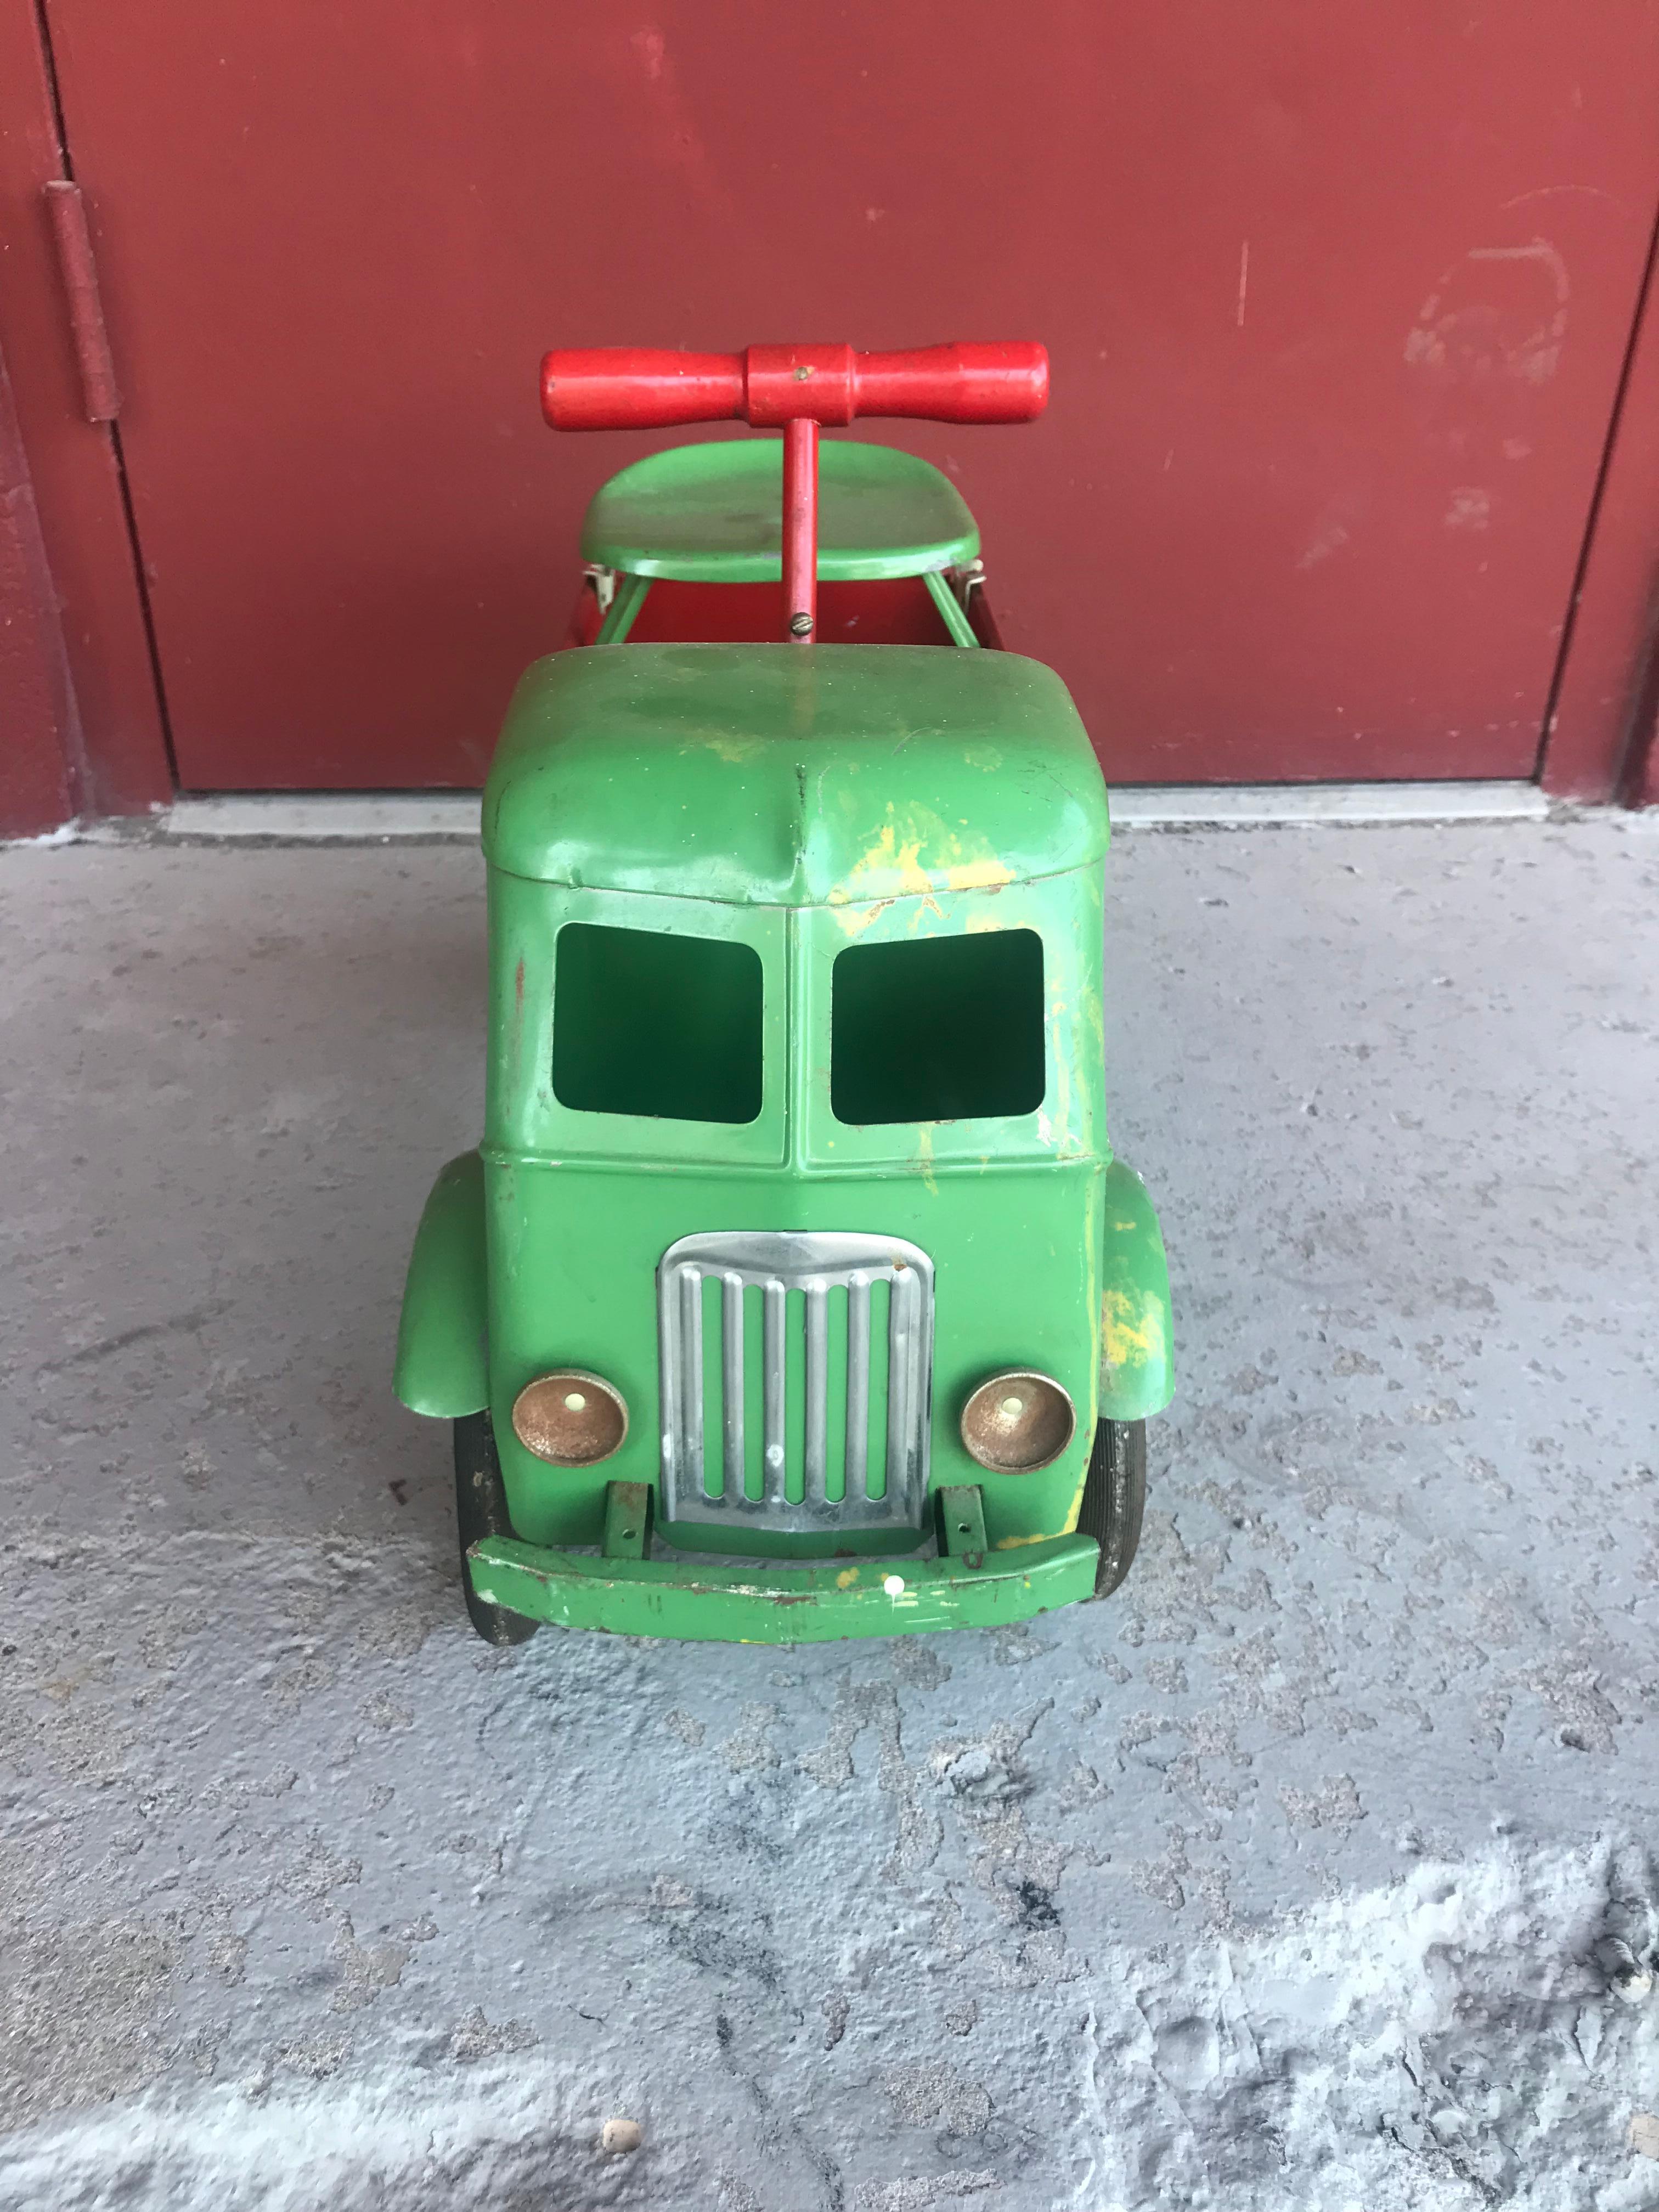 1930s keystone pressed metal ride-em dump truck, chairs ride on toy, excellent original condition.